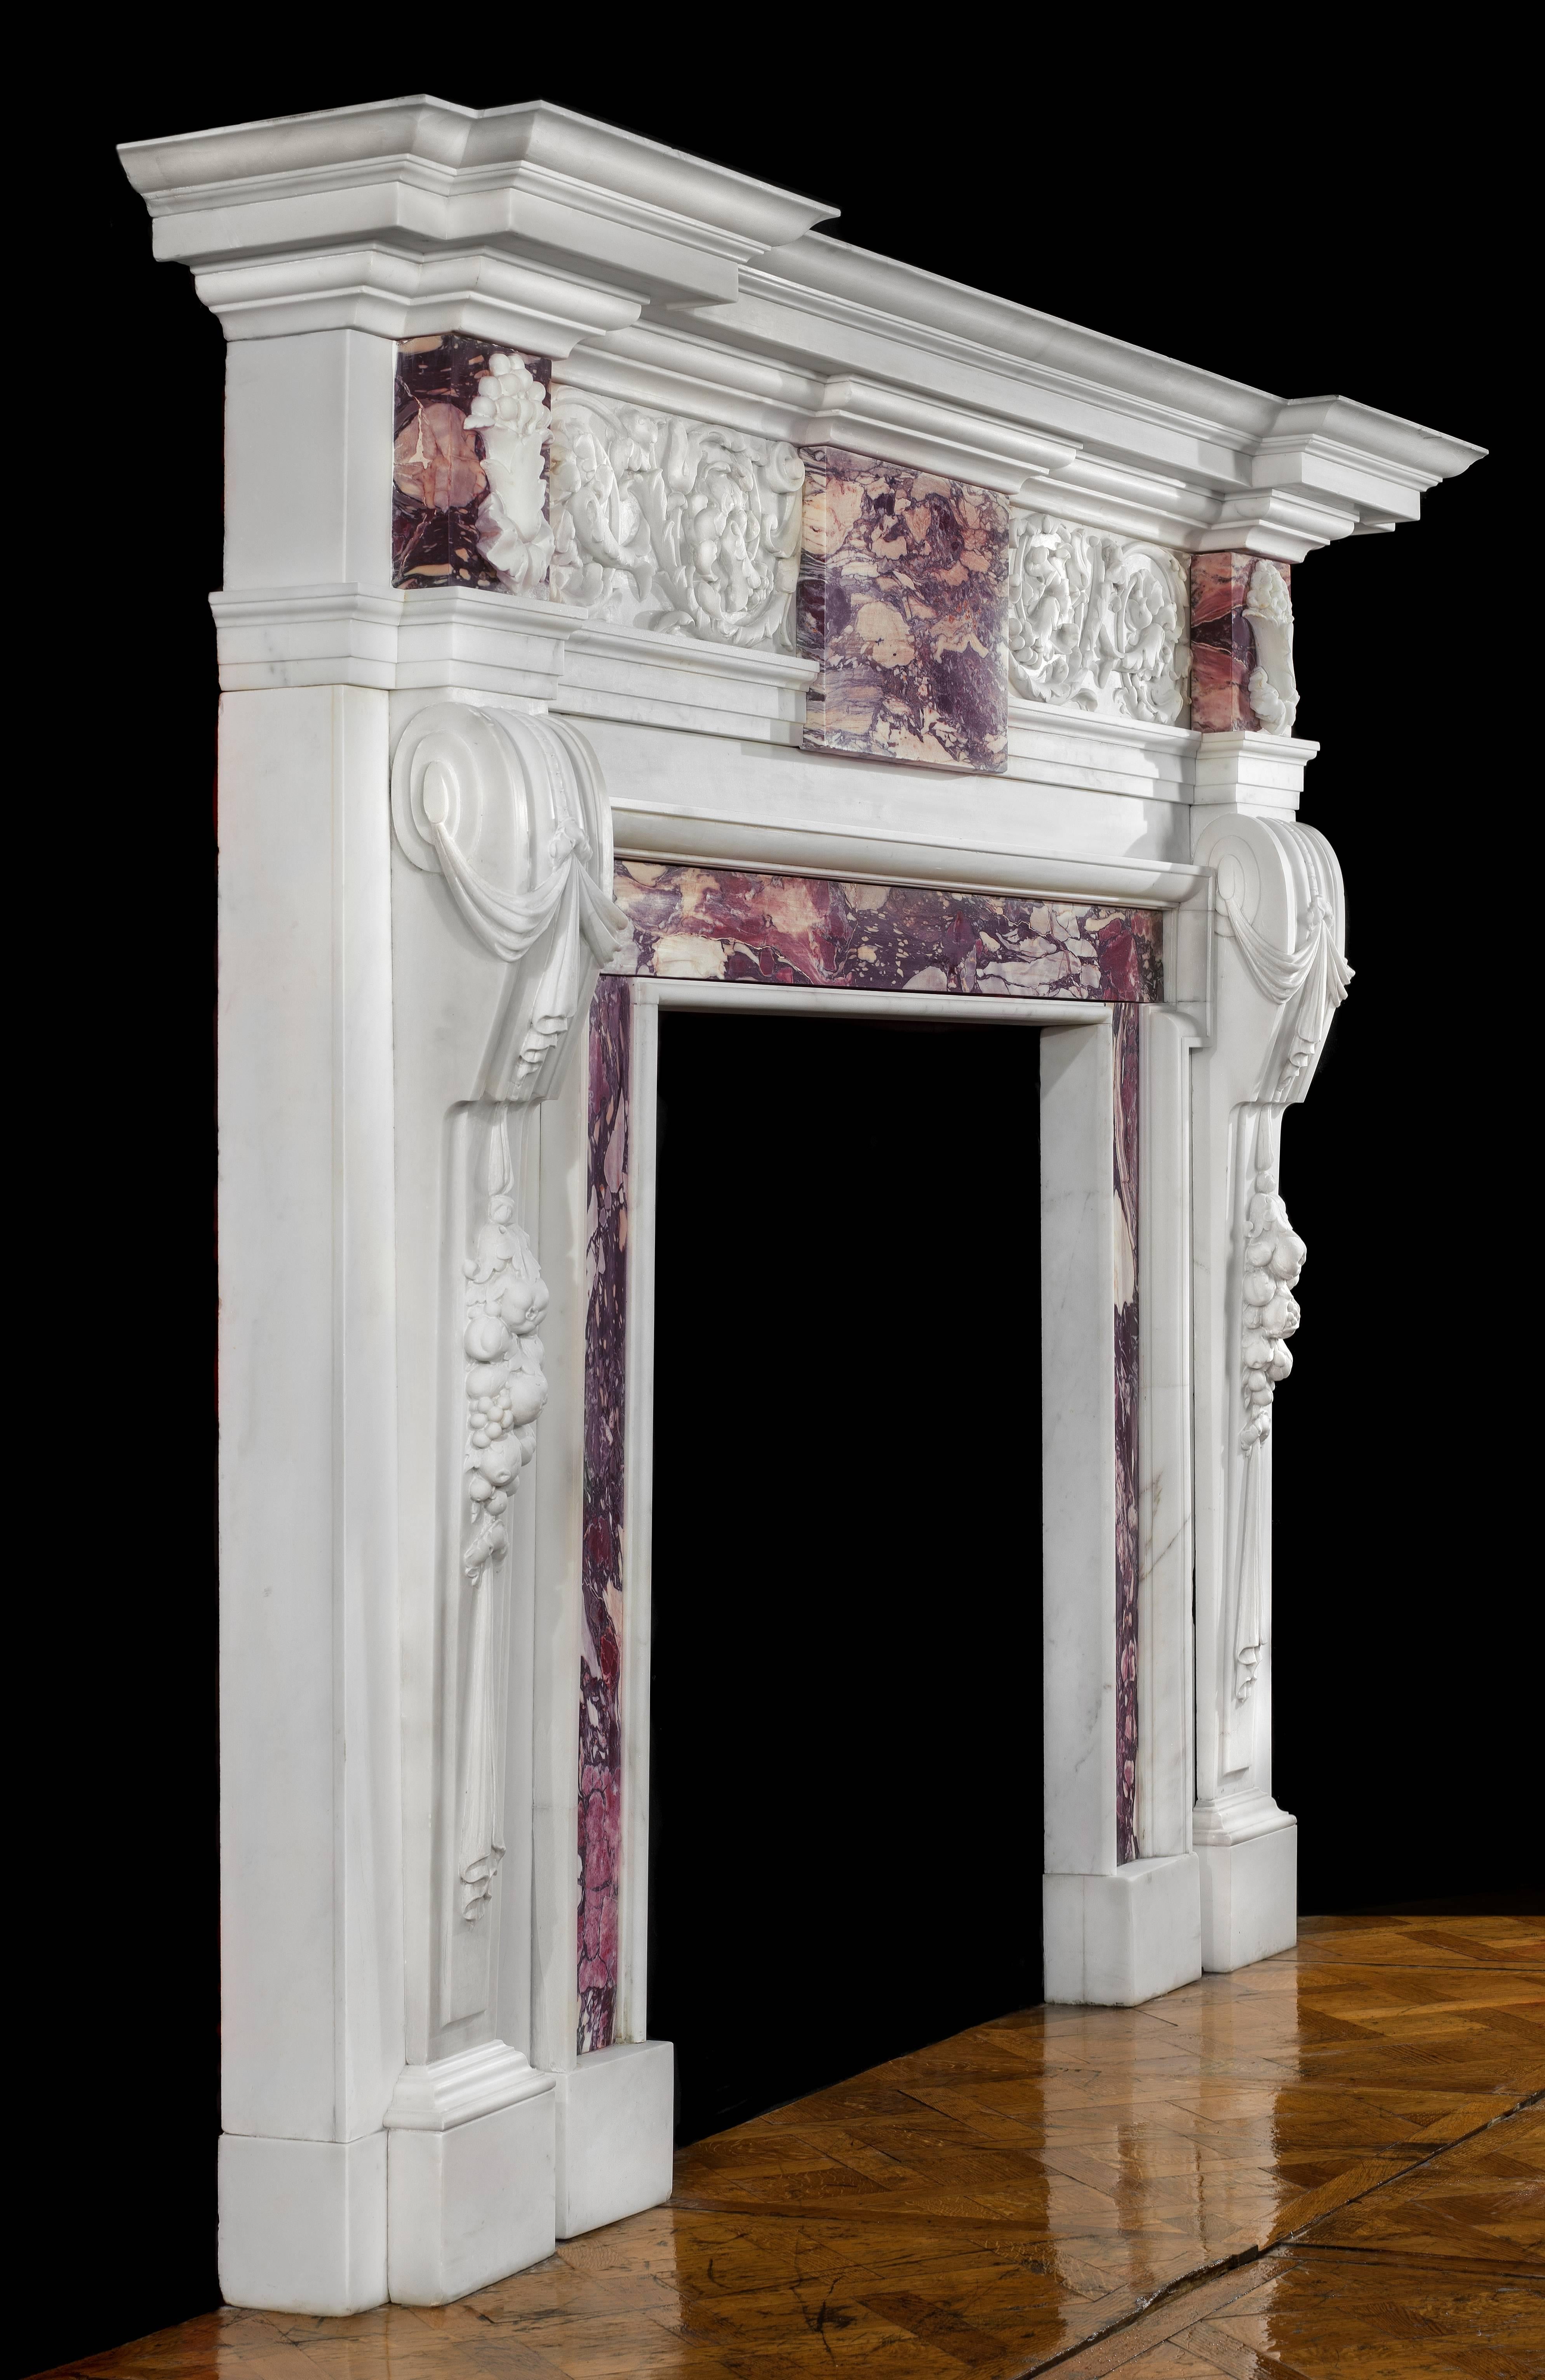 A large and fine antique Palladian style chimneypiece in the manner of William Kent (1685-1748). Carved in pure white Statuary Marble and with Breche Violette endblocks and ingrounds, it has a prominent corniced shelf set over a beautifully scrolled